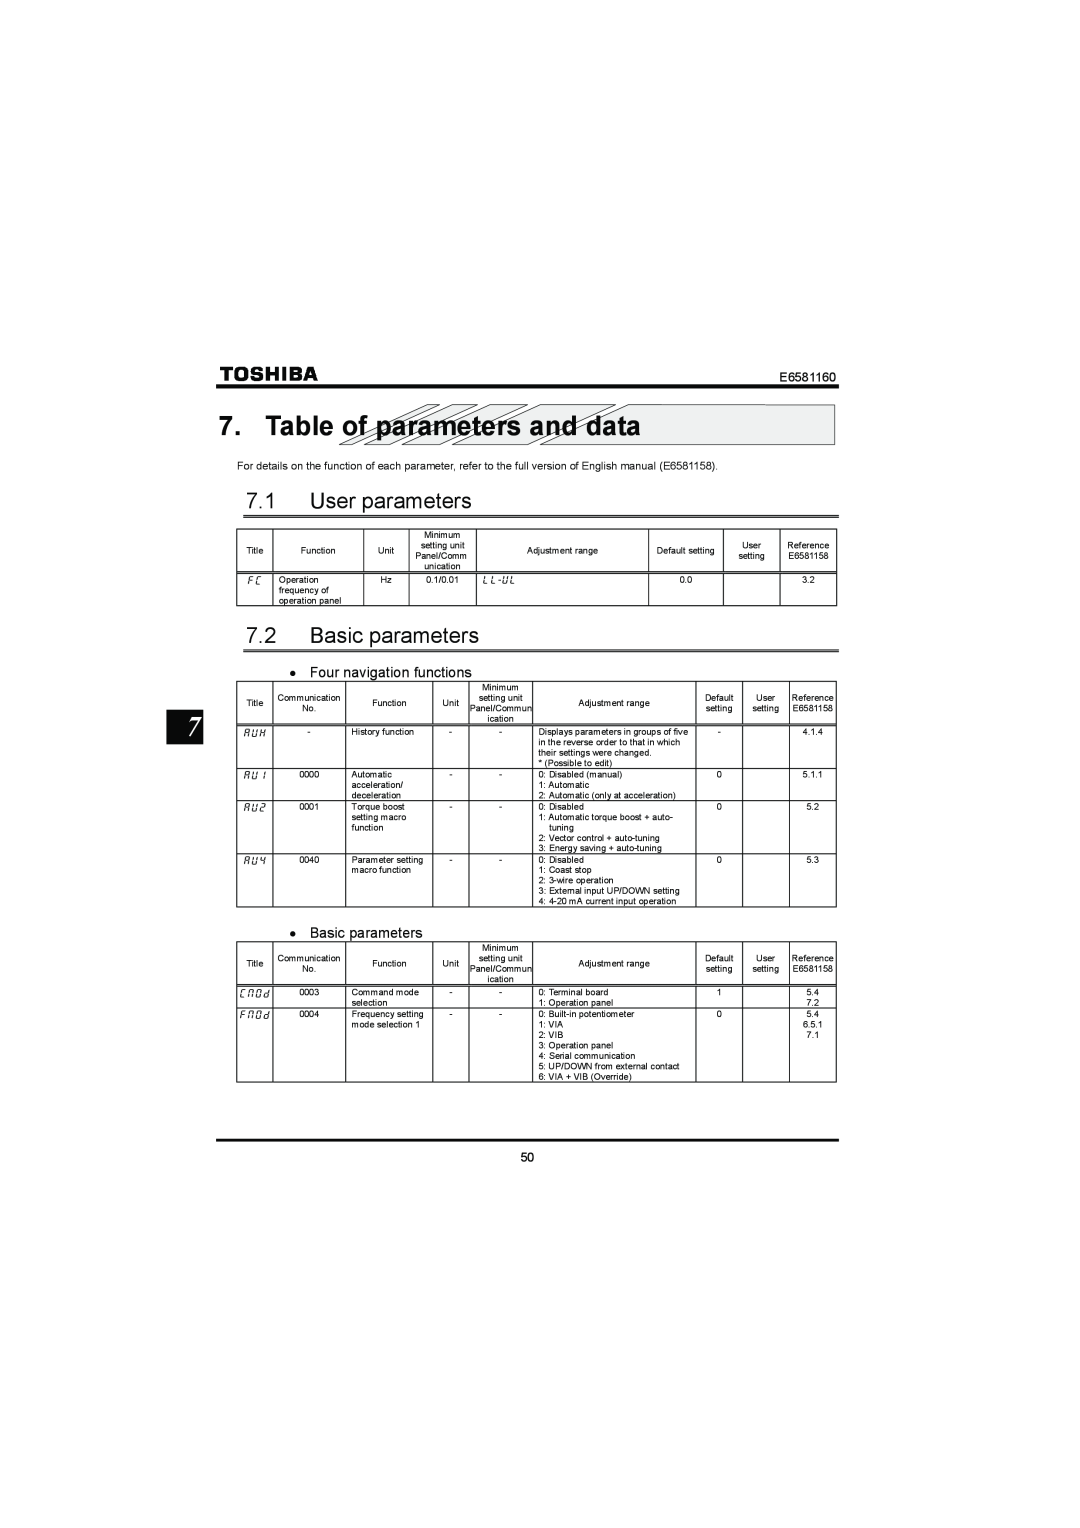 Toshiba VF-S11 manual Table of parameters and data, User parameters, Basic parameters, E6581160 